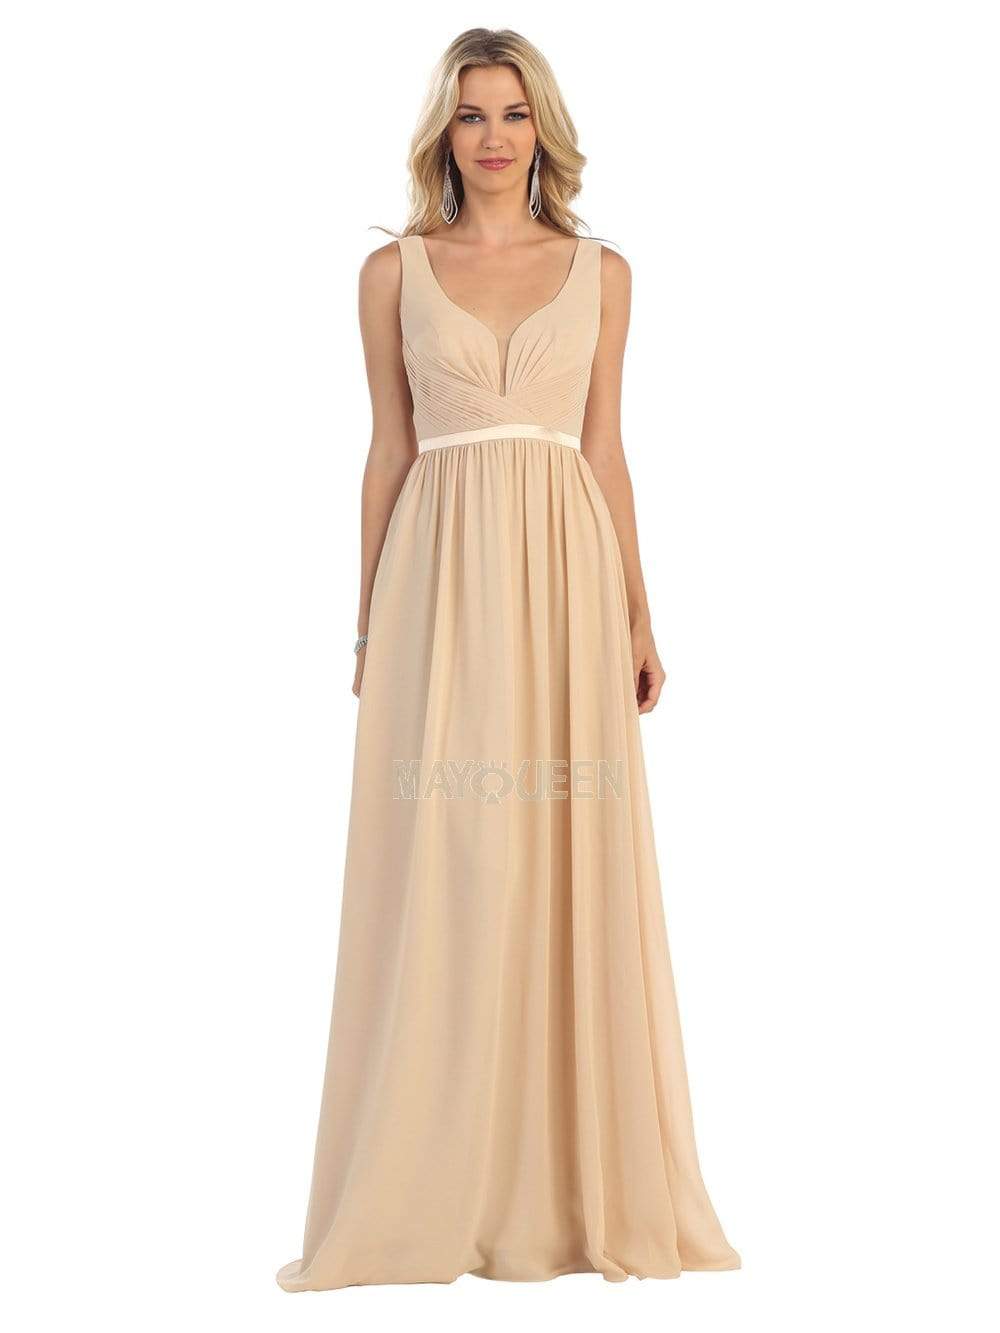 May Queen - MQ1225 Sleeveless Illusion Plunging A-Line Gown Bridesmaid Dresses 4 / Champagne